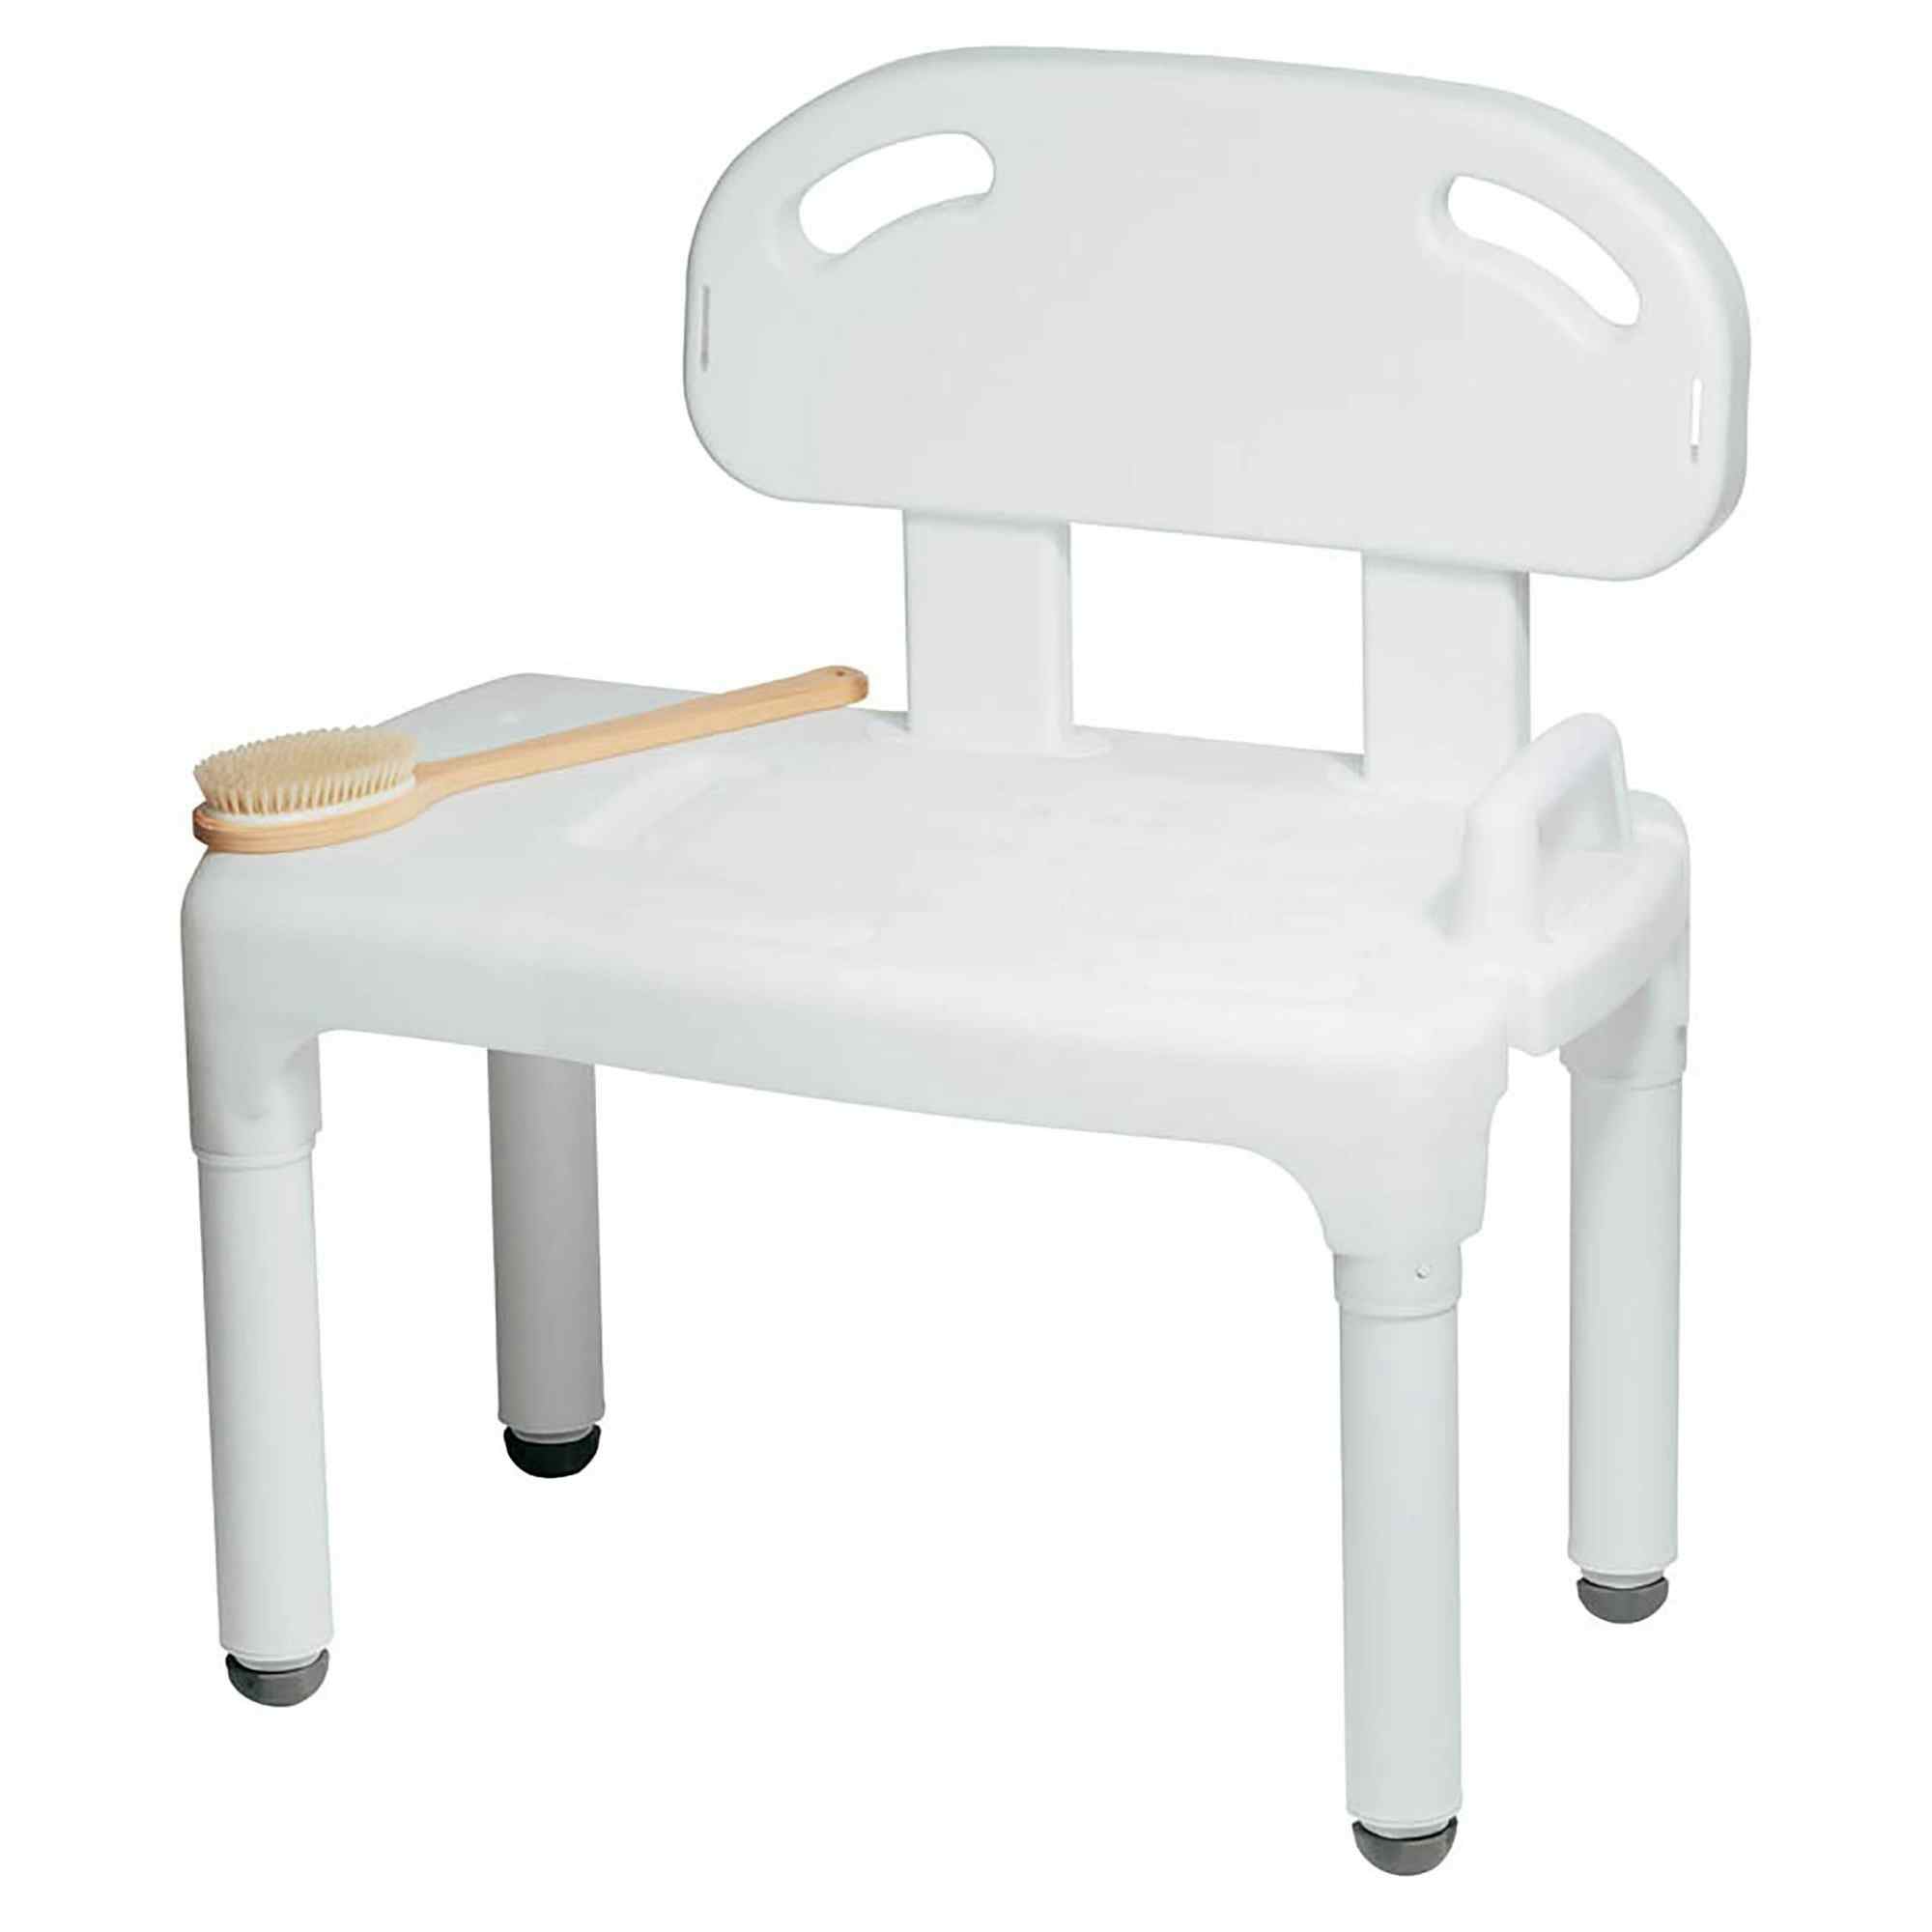 Carex Bath Transfer Bench Without Arms, FGB170C00000, 1 Each